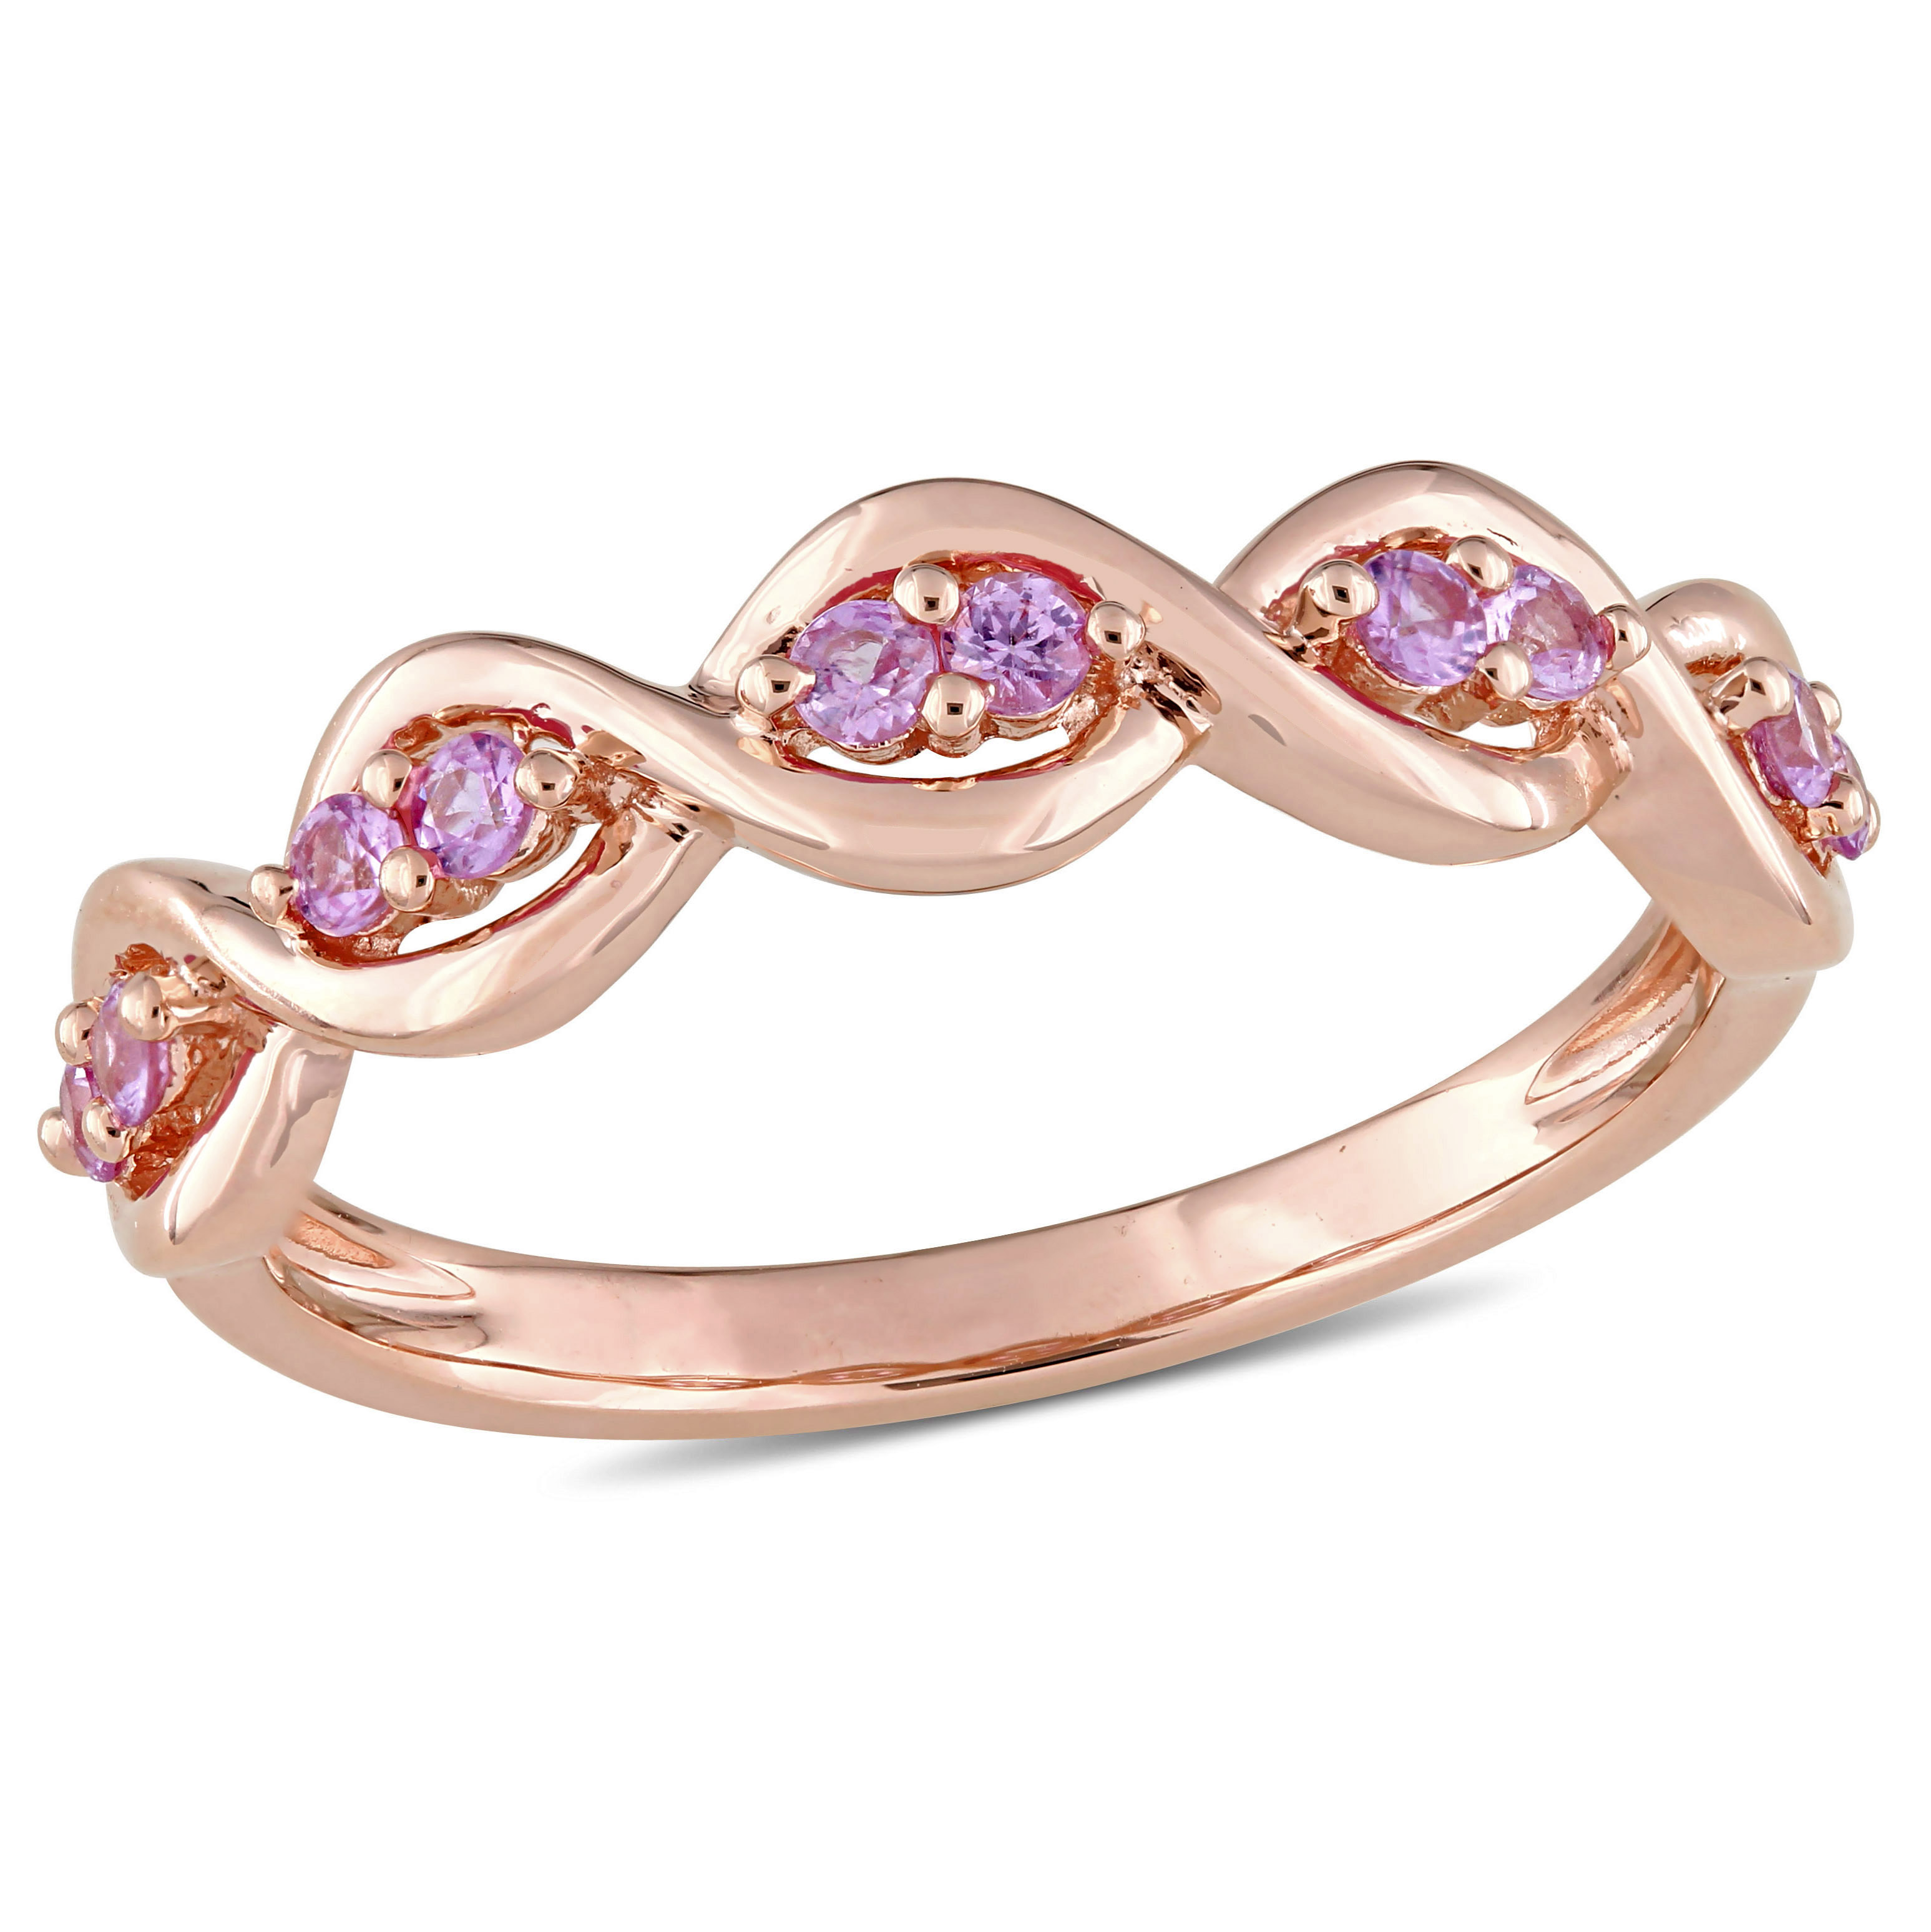 Pink Sapphire Semi-Eternity Infinity Anniversary Ring in 14k Rose Gold